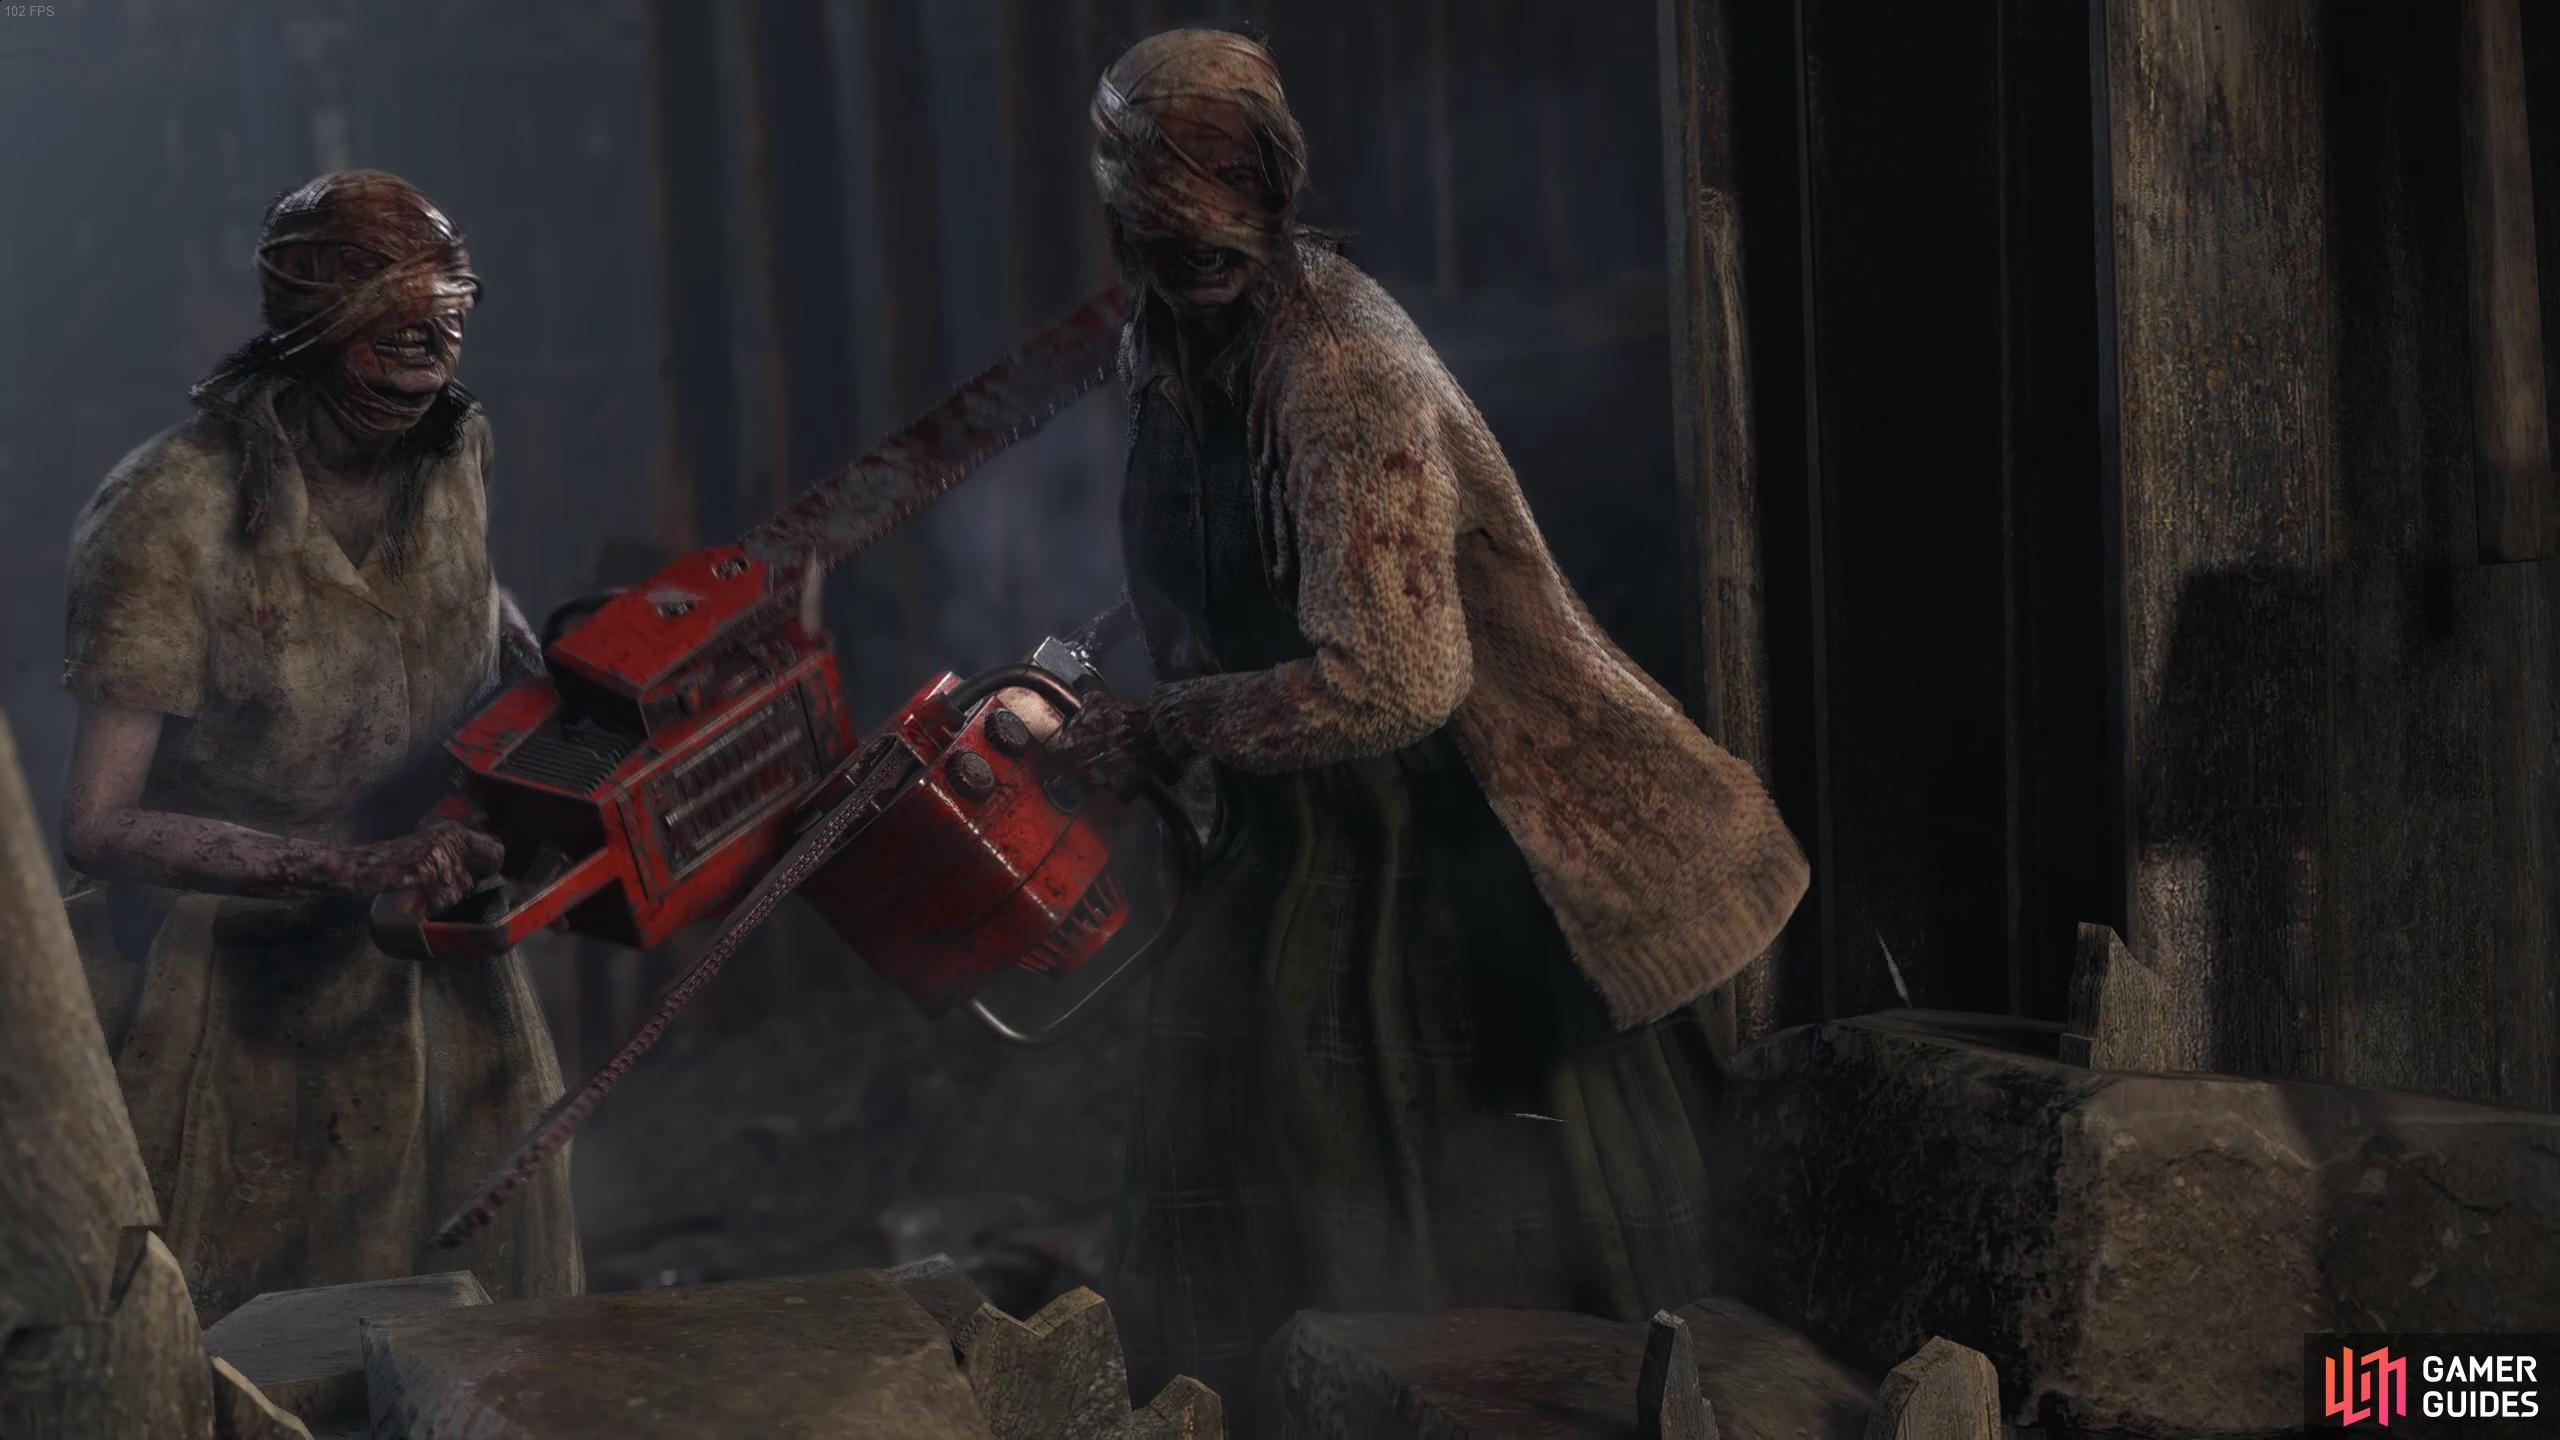 Resident Evil 4 Remake: Chainsaw Demo Available Now - Rely on Horror